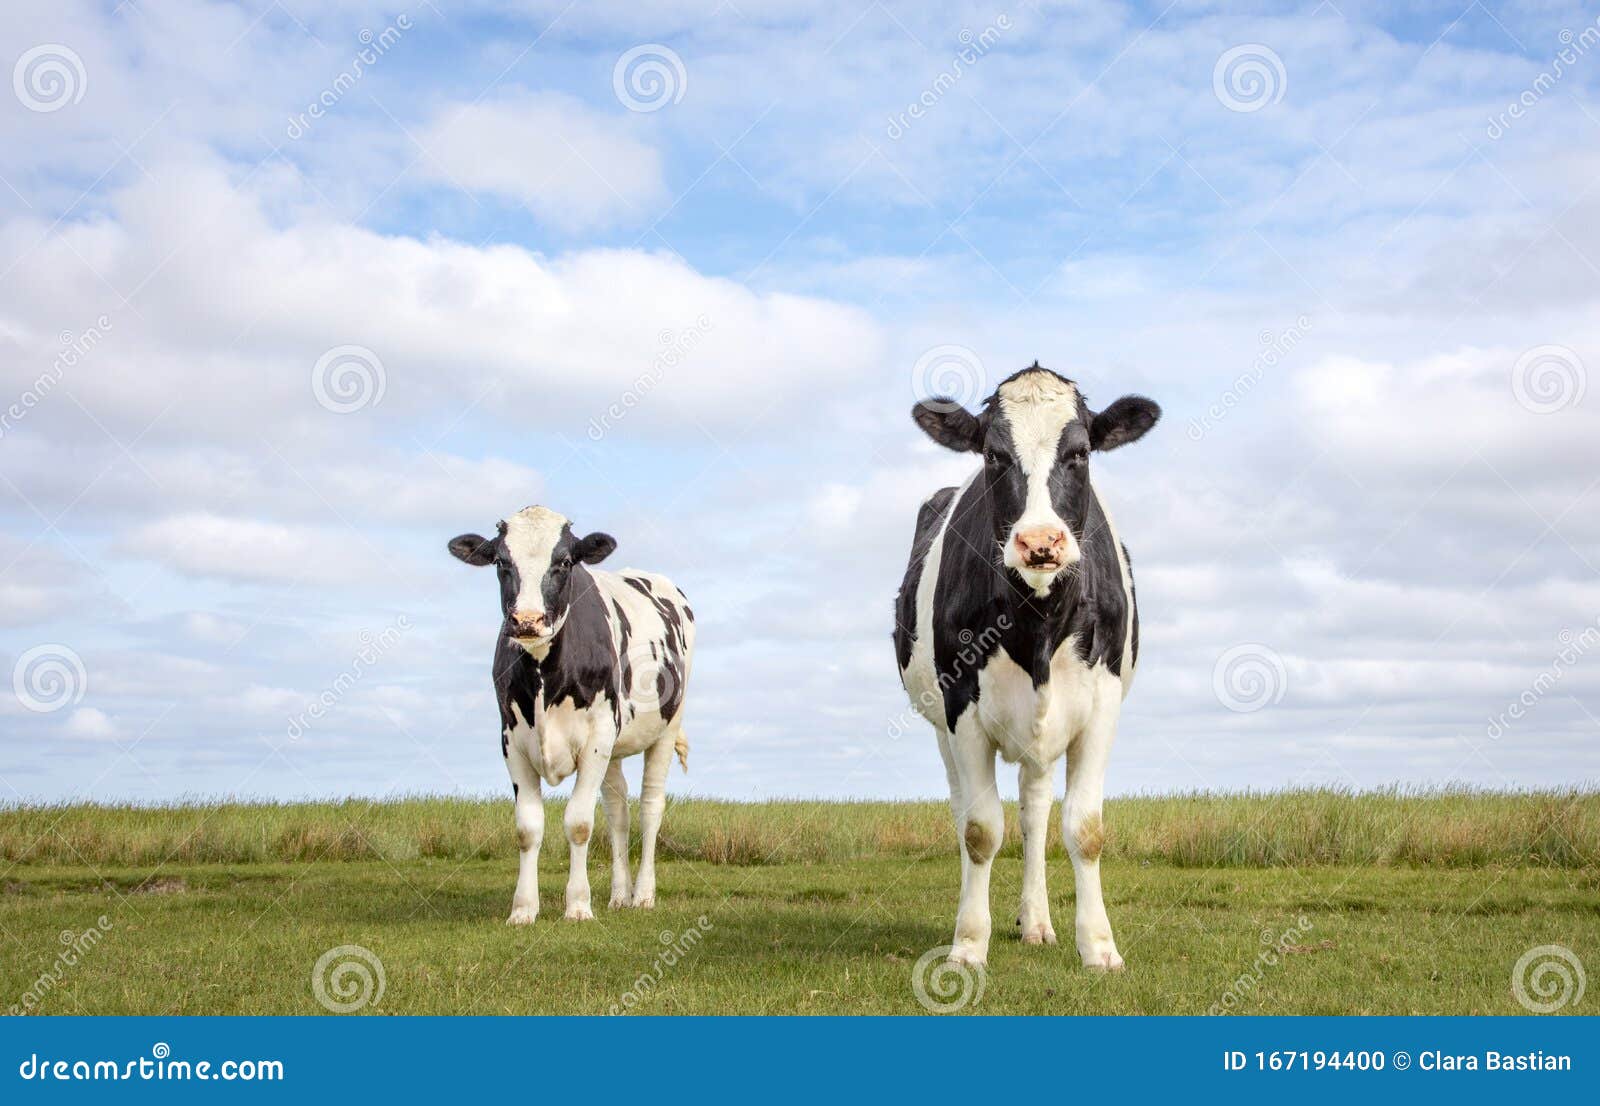 Two Black and White Cows, Frisian Holstein, Standing in a Pasture, Blue ...